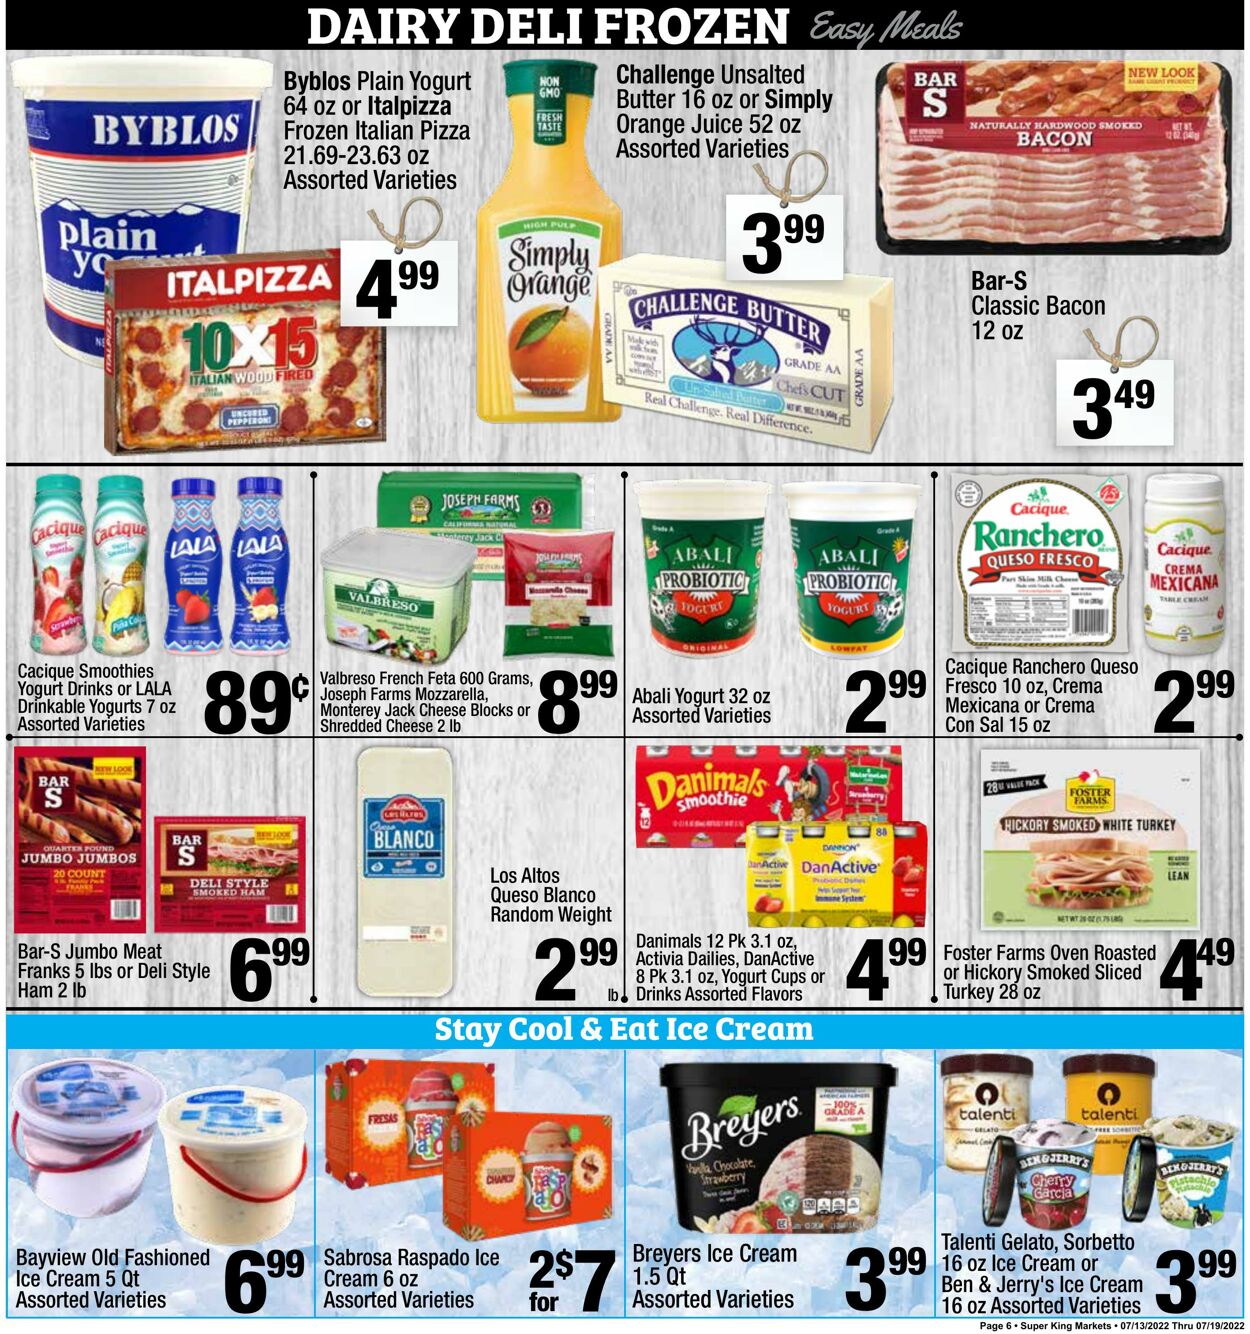 Weekly ad Super King Markets 07/13/2022 - 07/19/2022